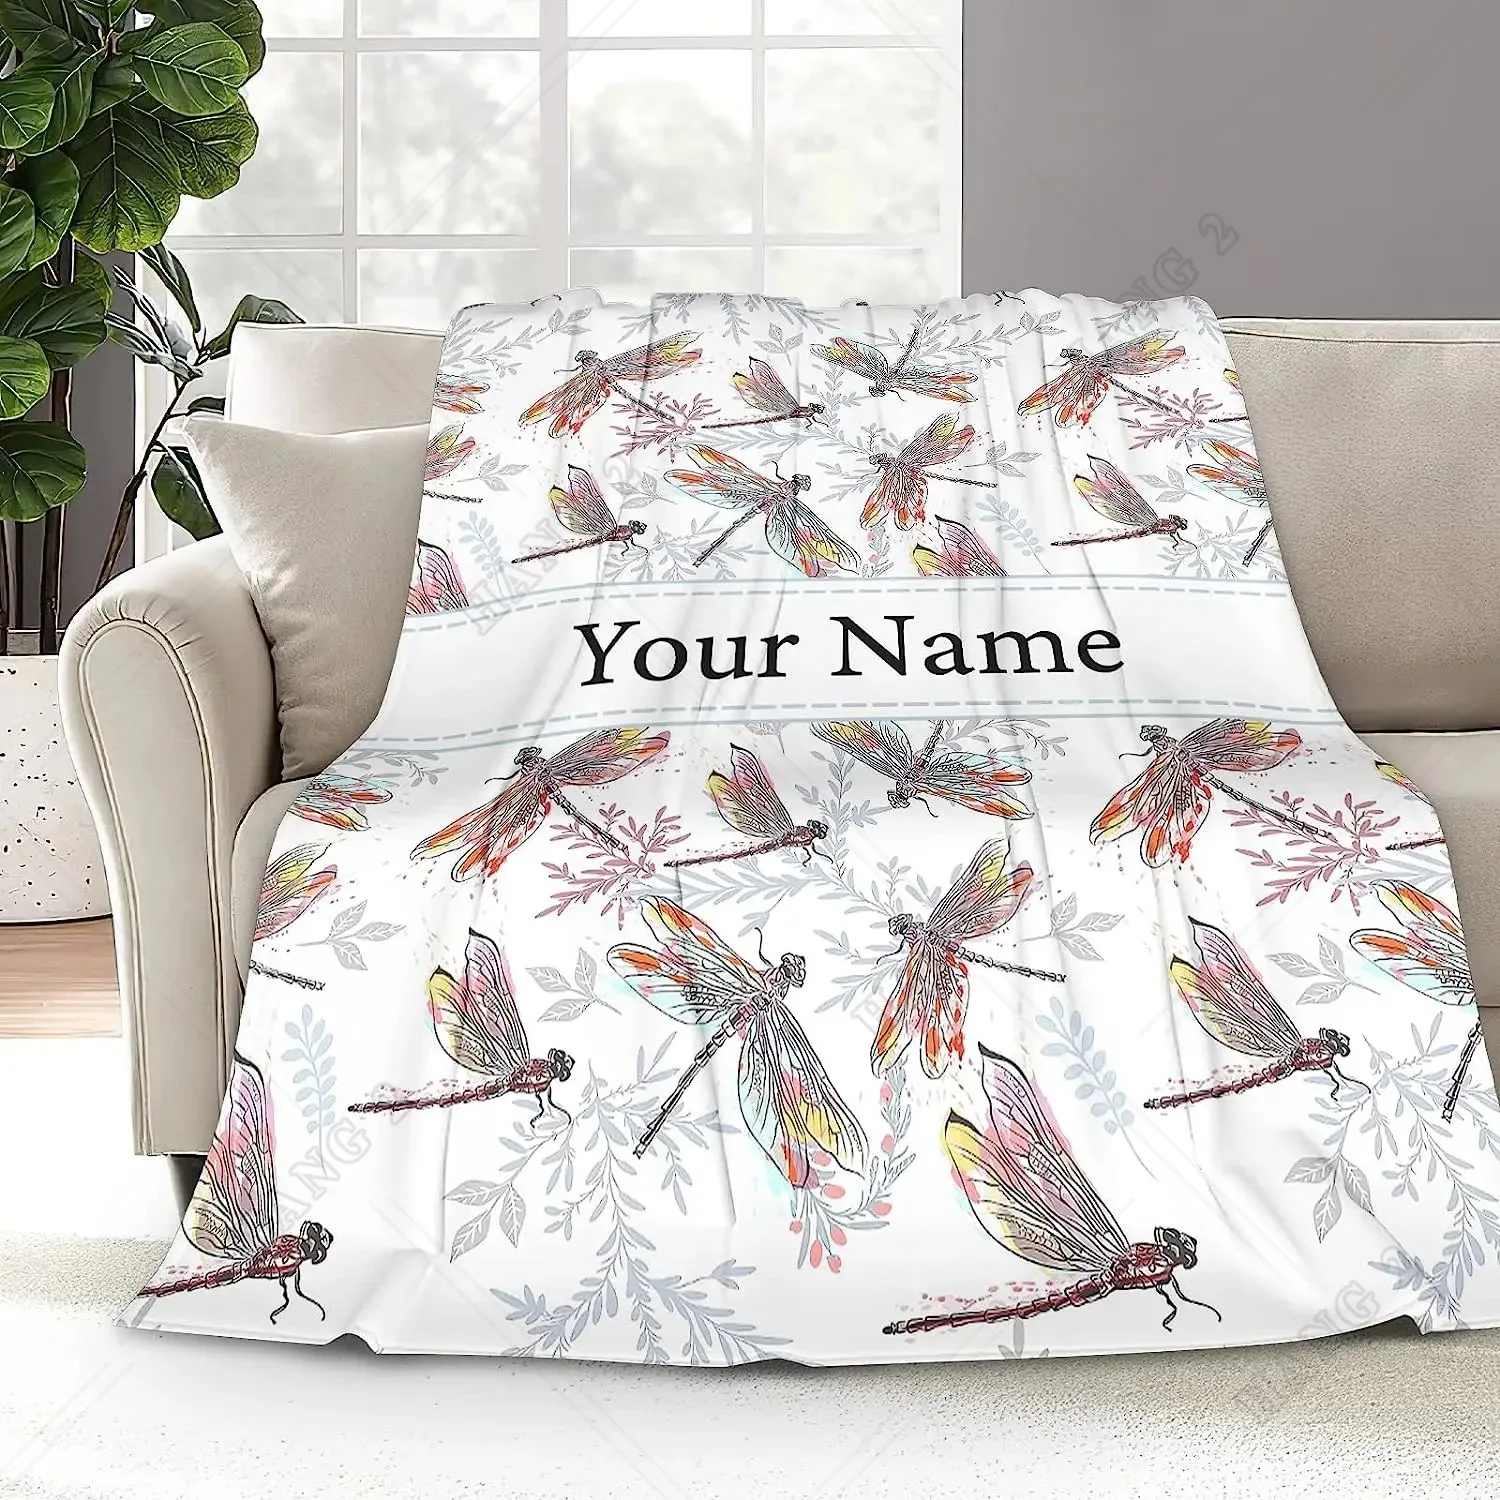 

Dragonfly Blanket, Personalized Name Blankets for Girls Daughter, Soft Cozy Dragonfly Flannel Blankets for Couch Sofa